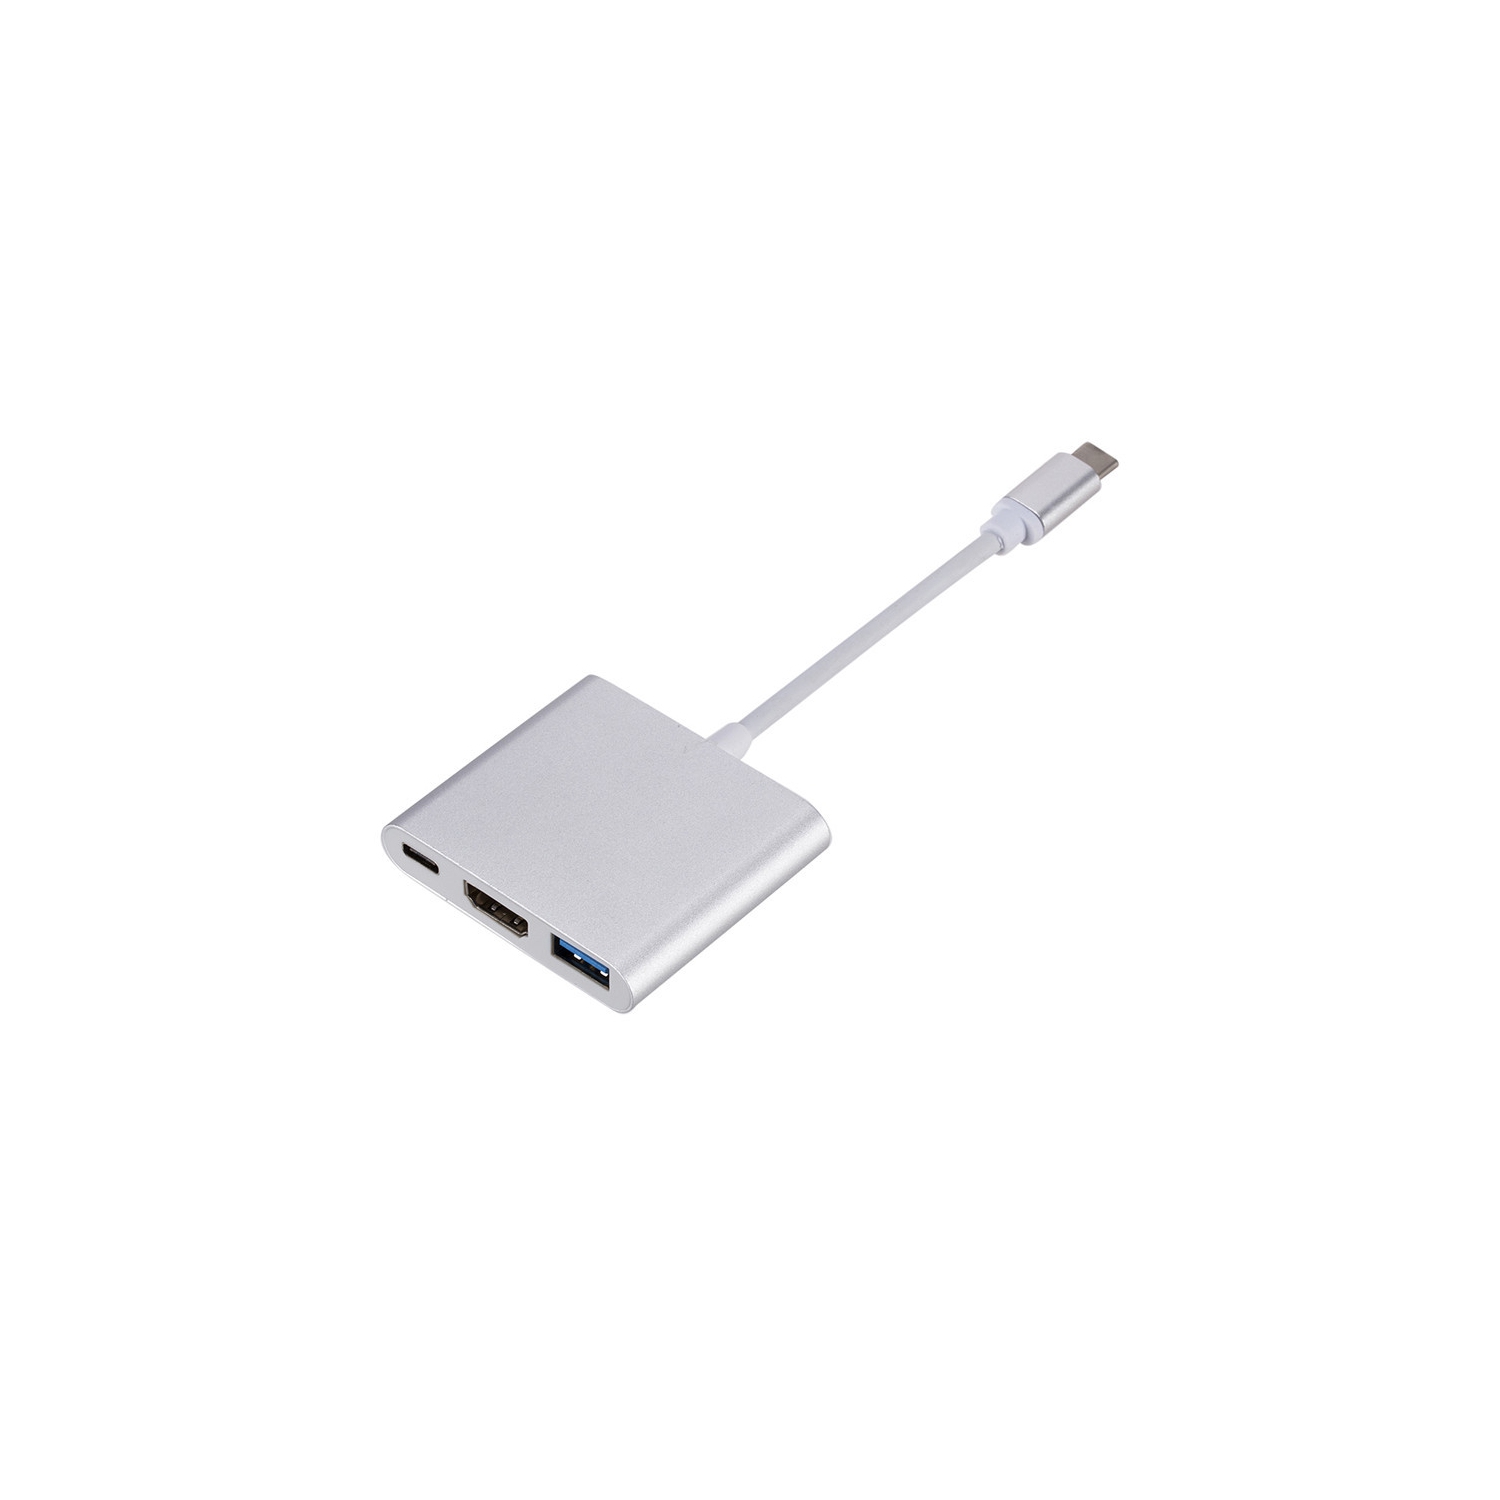 USB-C Hub with HDMI 3-in-1 Charging Port Adapter for New Apple MacBook Chromebook Pixel Samsung S9 and More